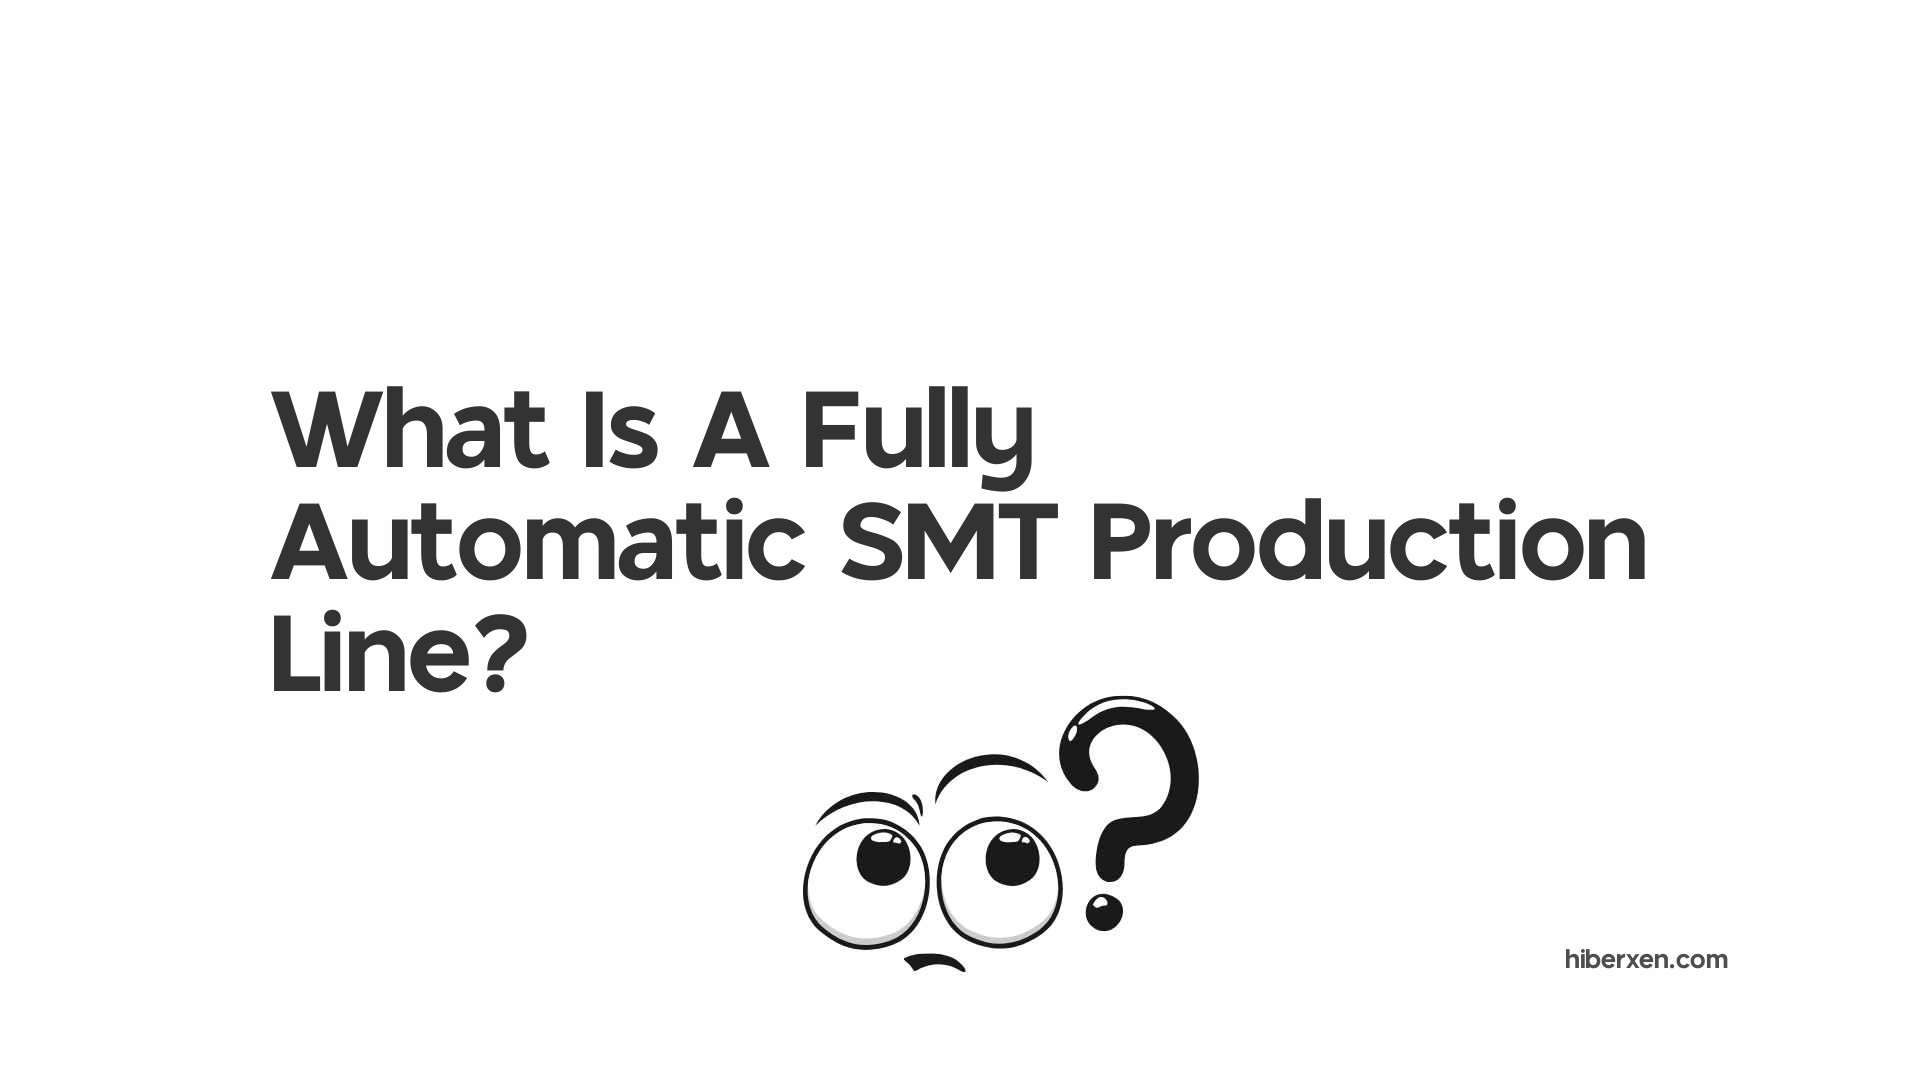 What Is A Fully Automatic SMT Production Line?